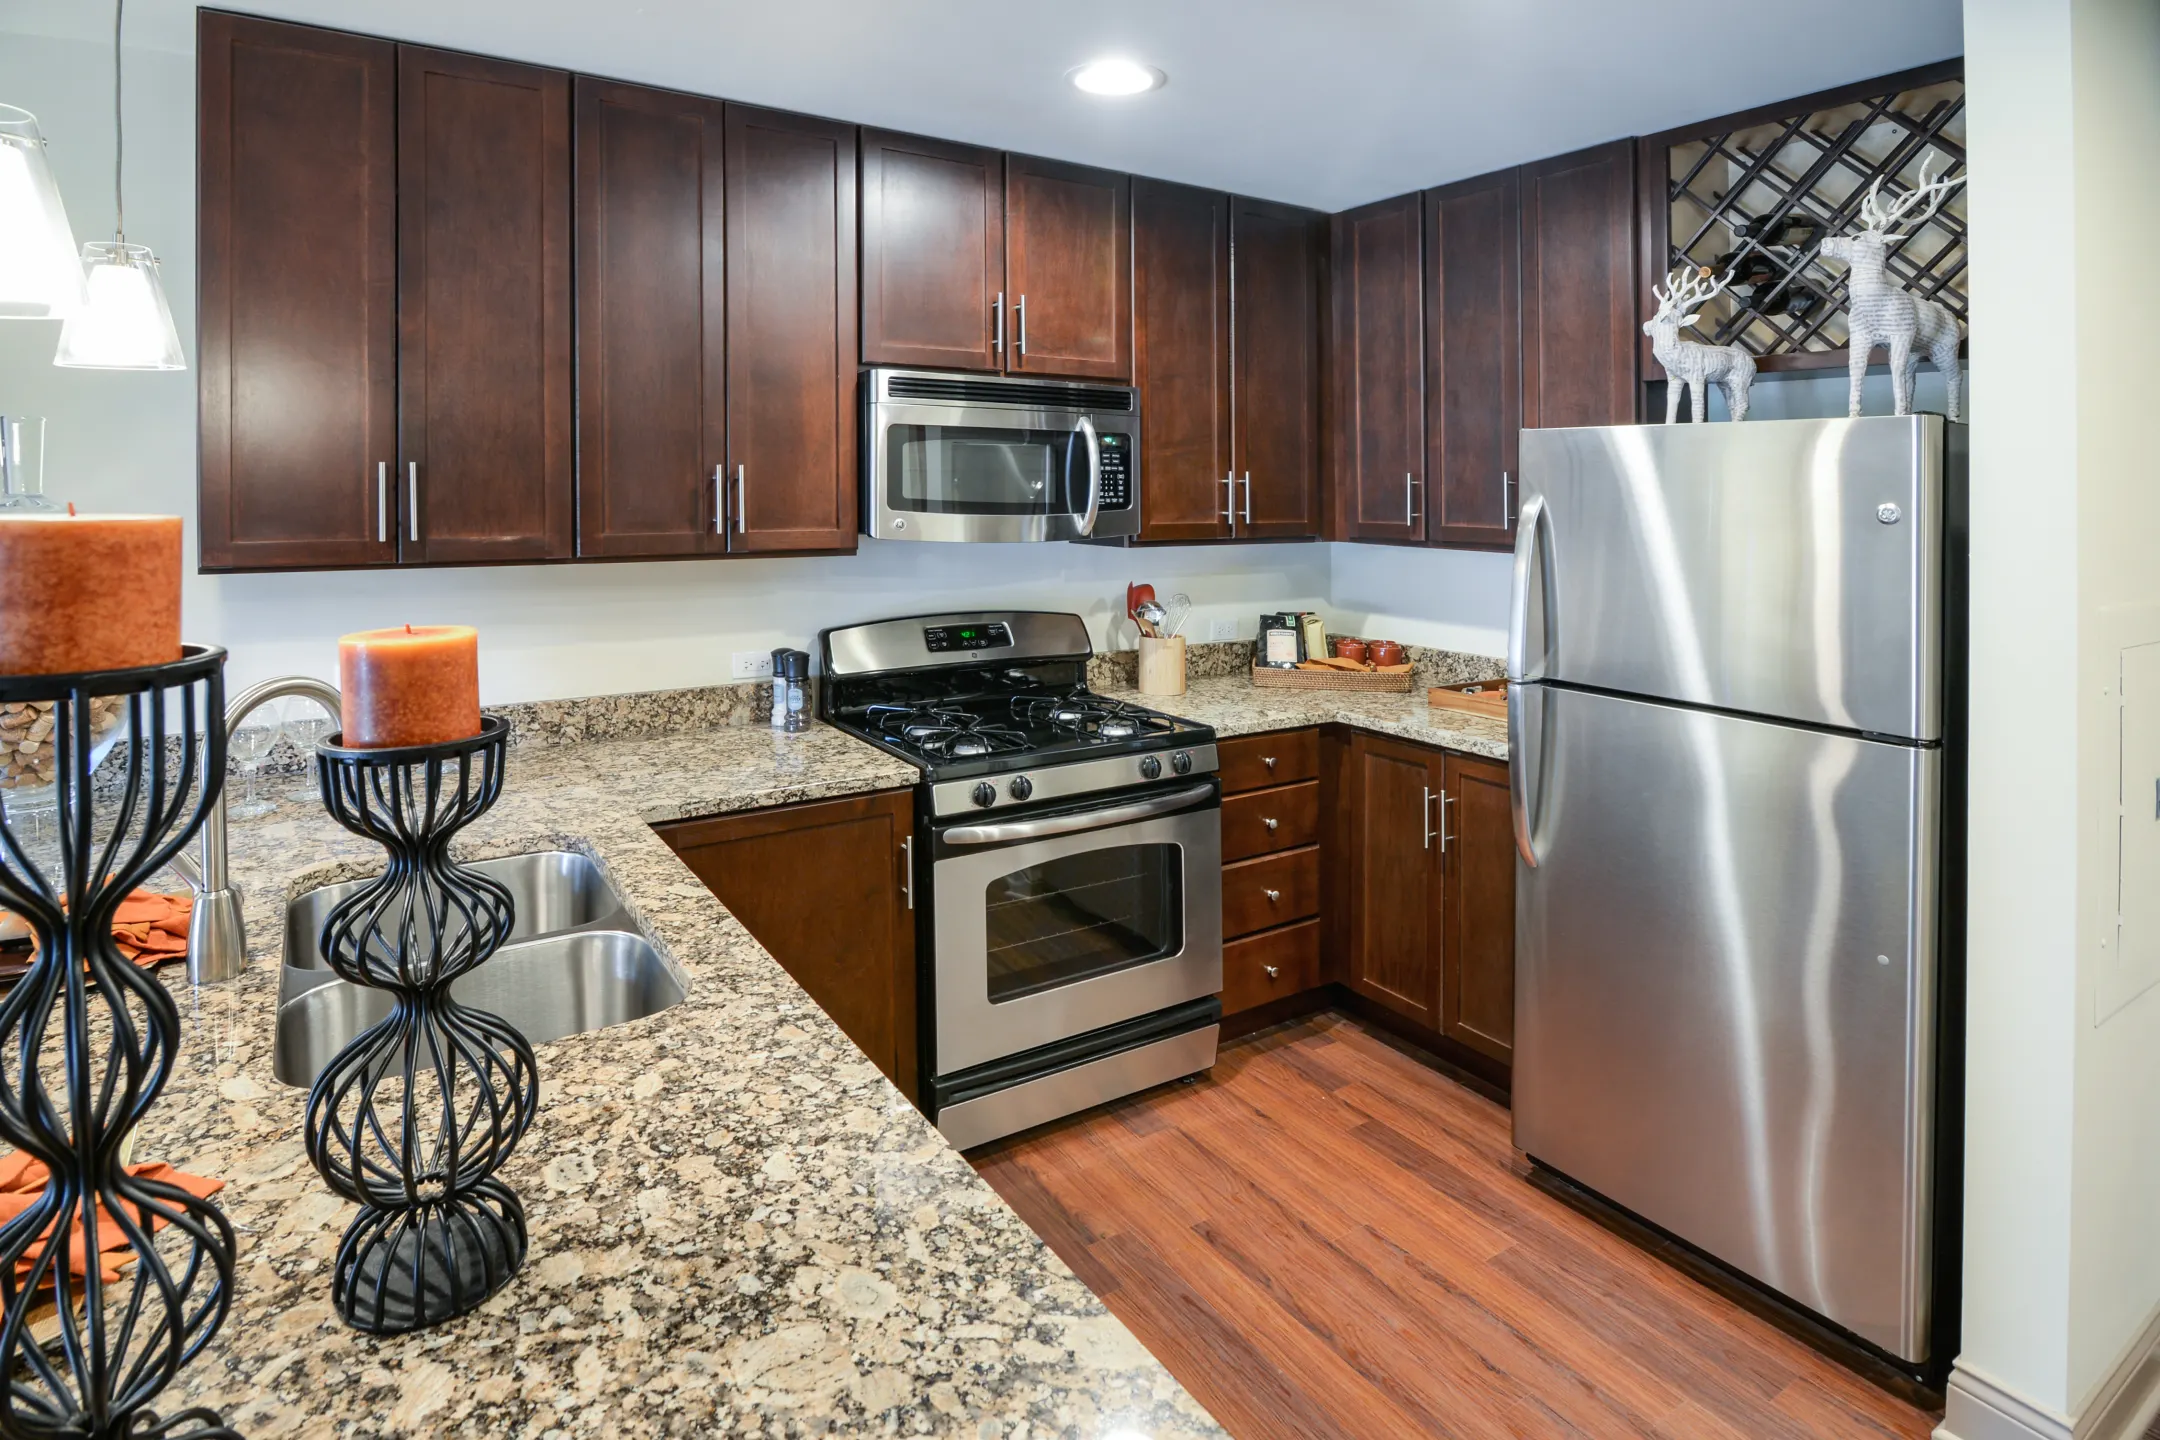 Kitchen - Ninety 7 Fifty On The Park Apartments - Orland Park, IL